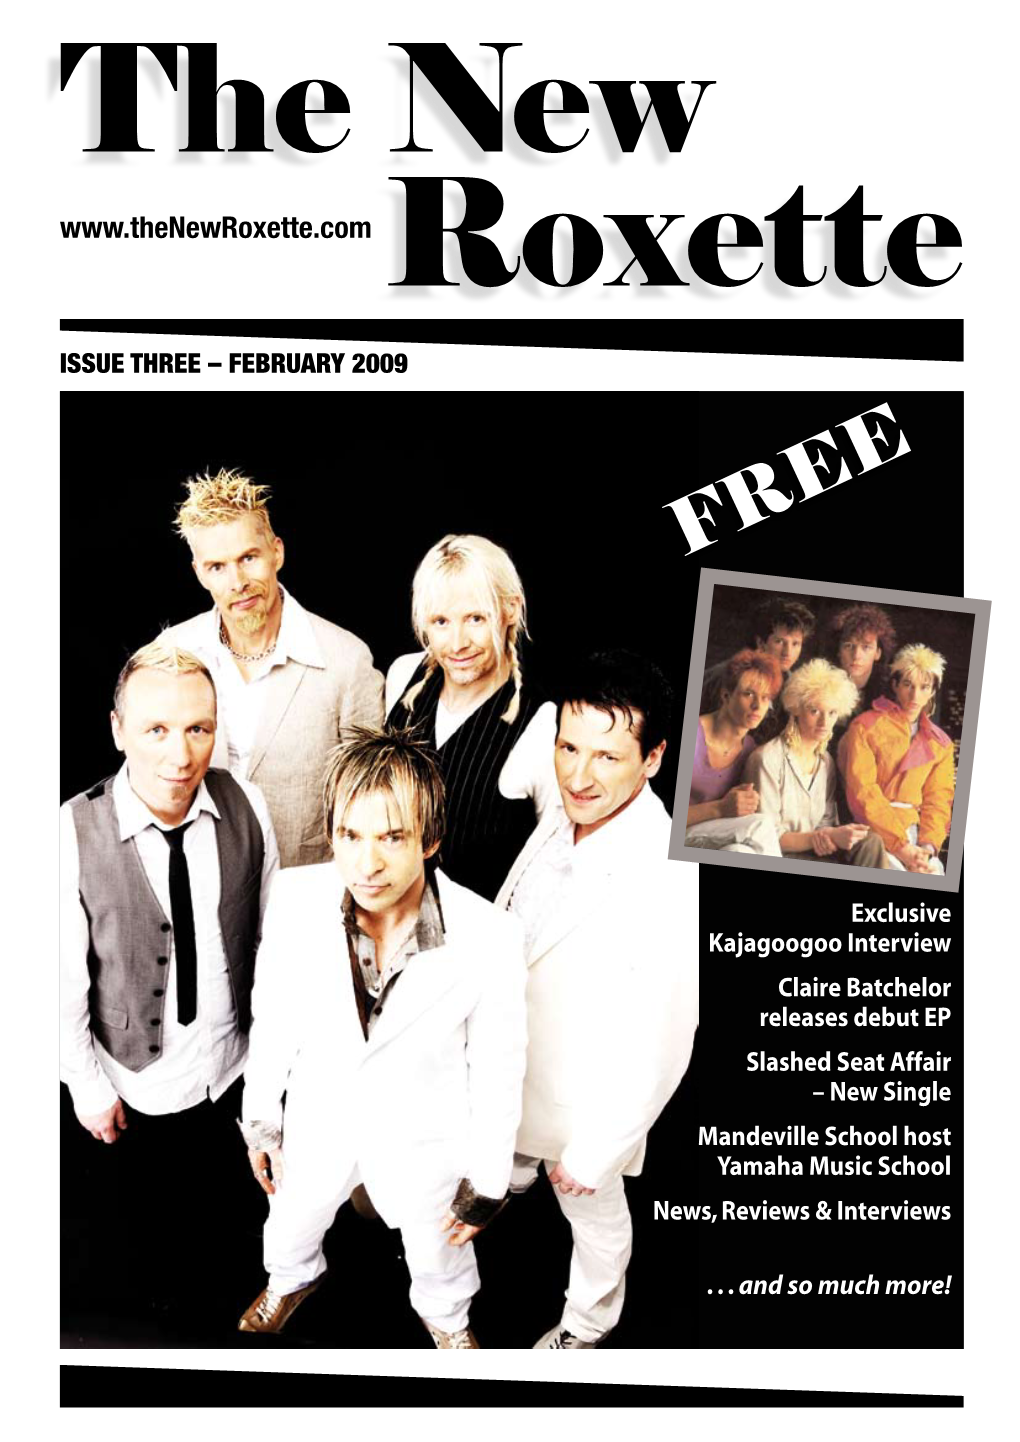 The New Roxette the New Coming Next Month